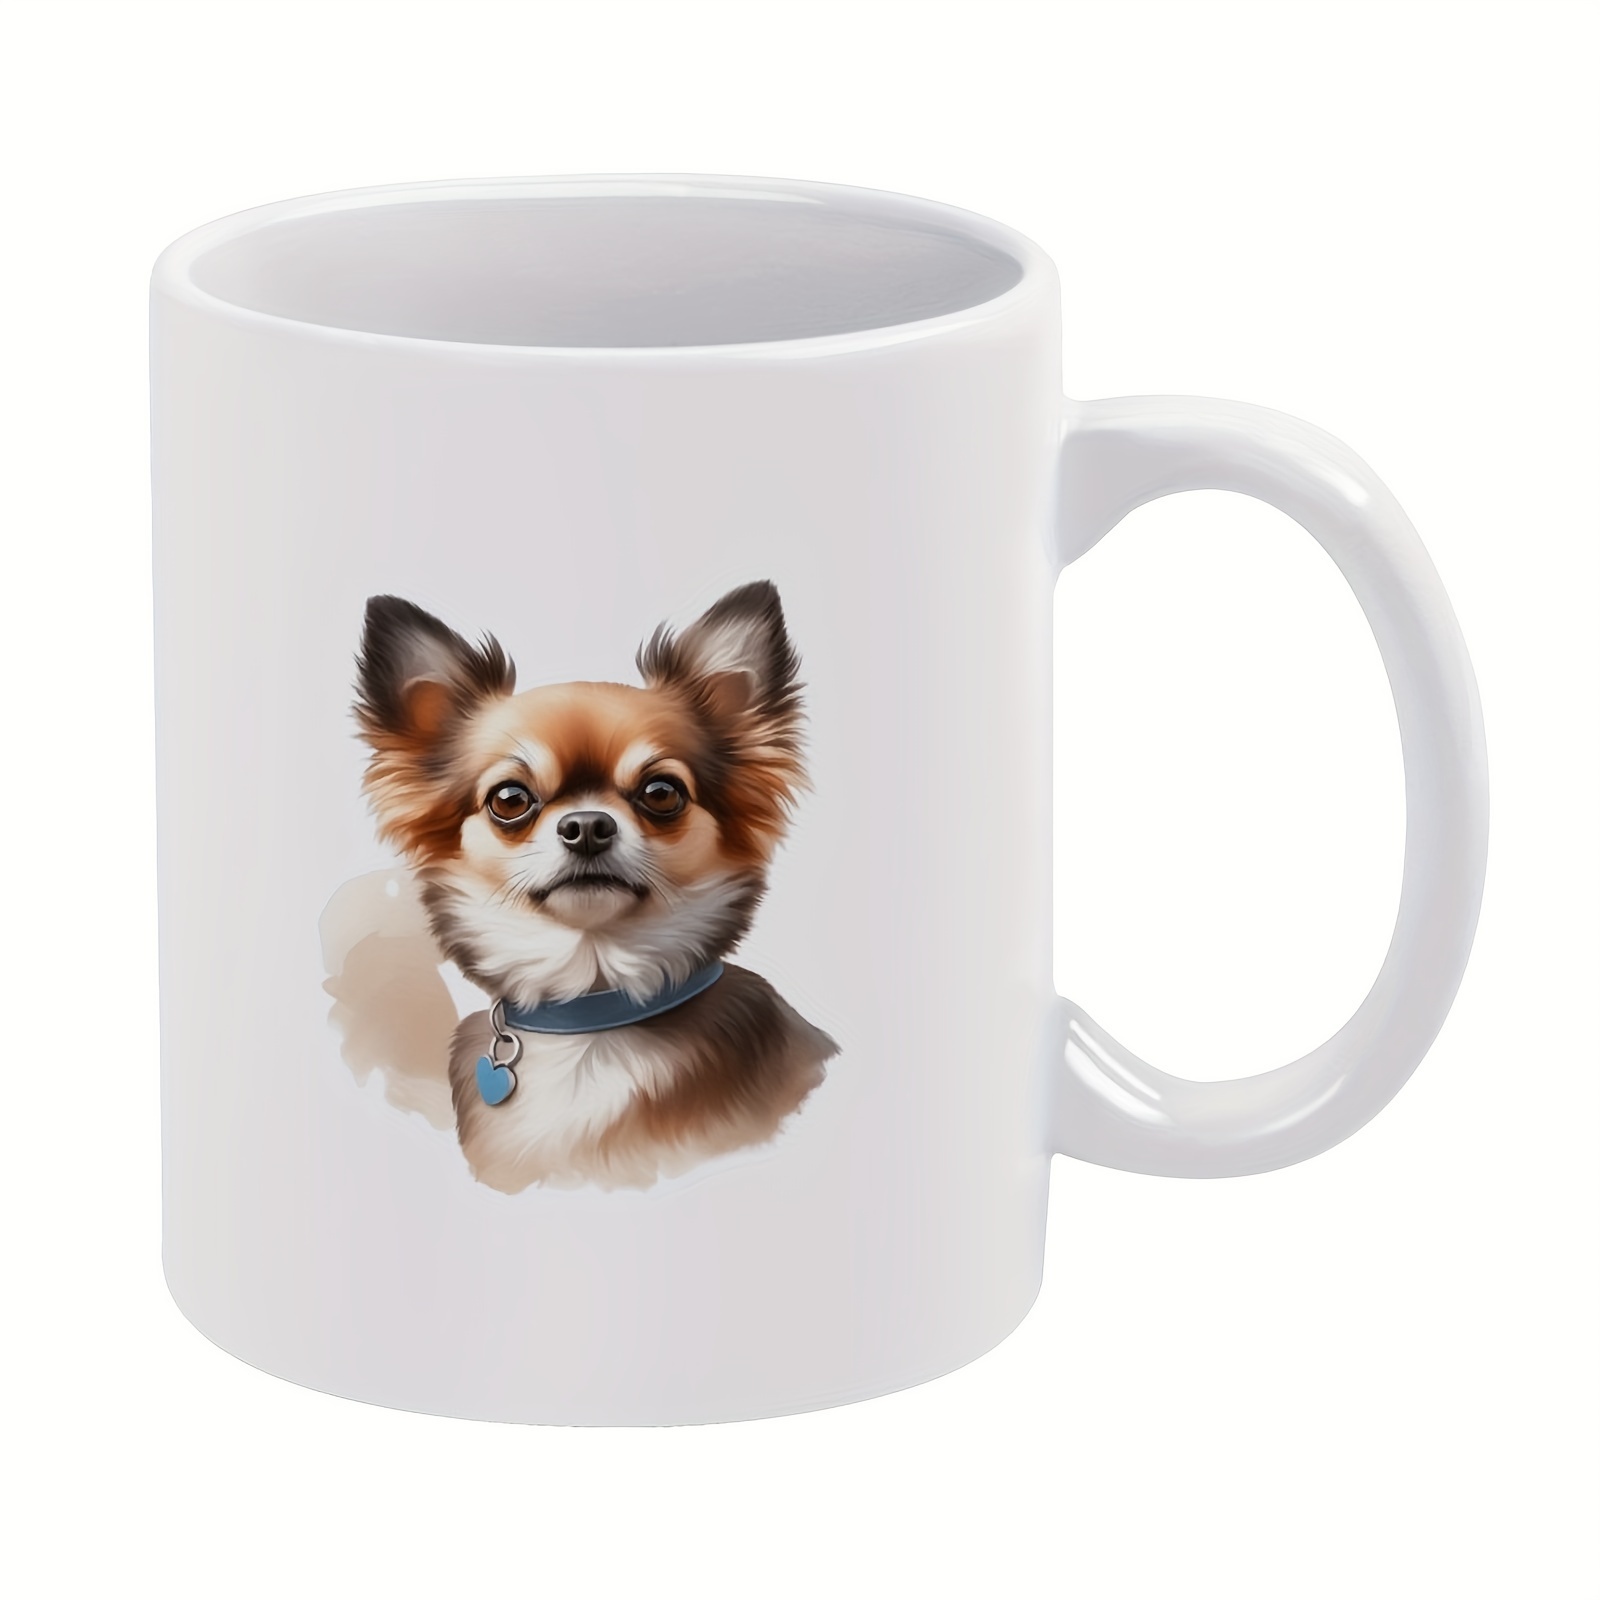 

1pc 11oz Mug, Coffee Mug, Chihuahua, Gift For Friends, Sisters, Coffee Drinker, Owner, Ceramic Cup, Christmas Gift, For Cafes